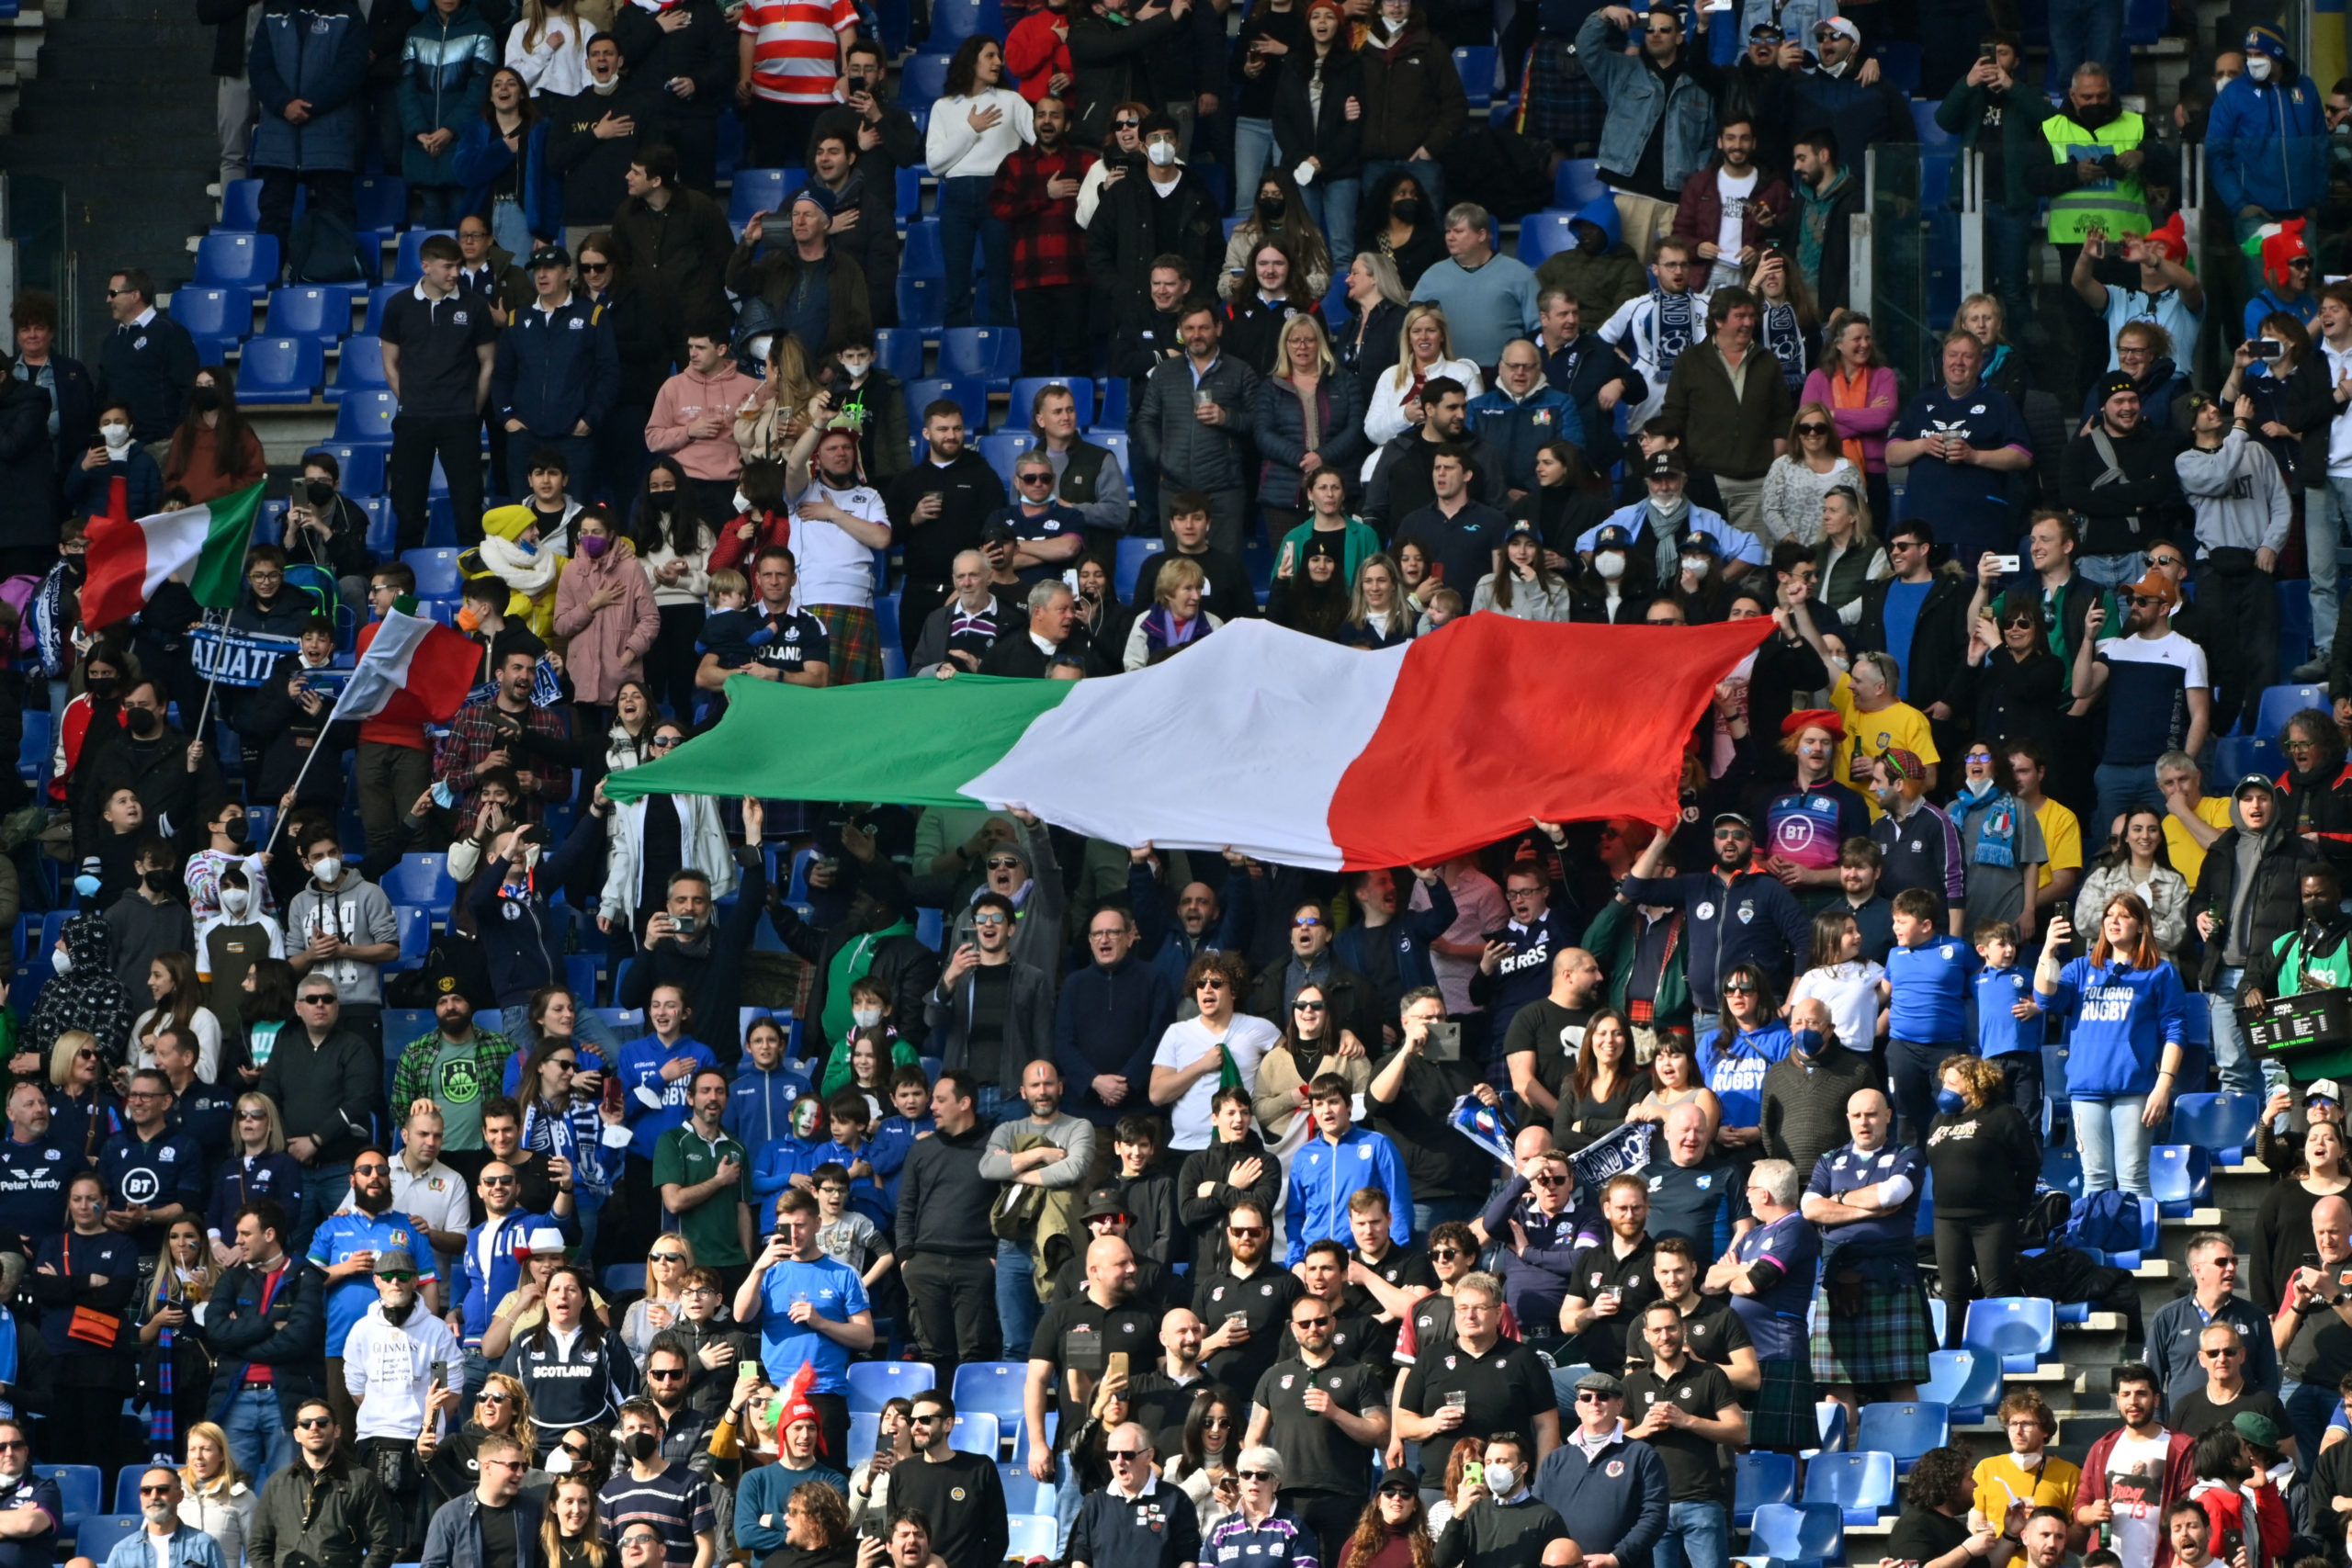 Italy's sports stadiums return to full capacity on April 1st.